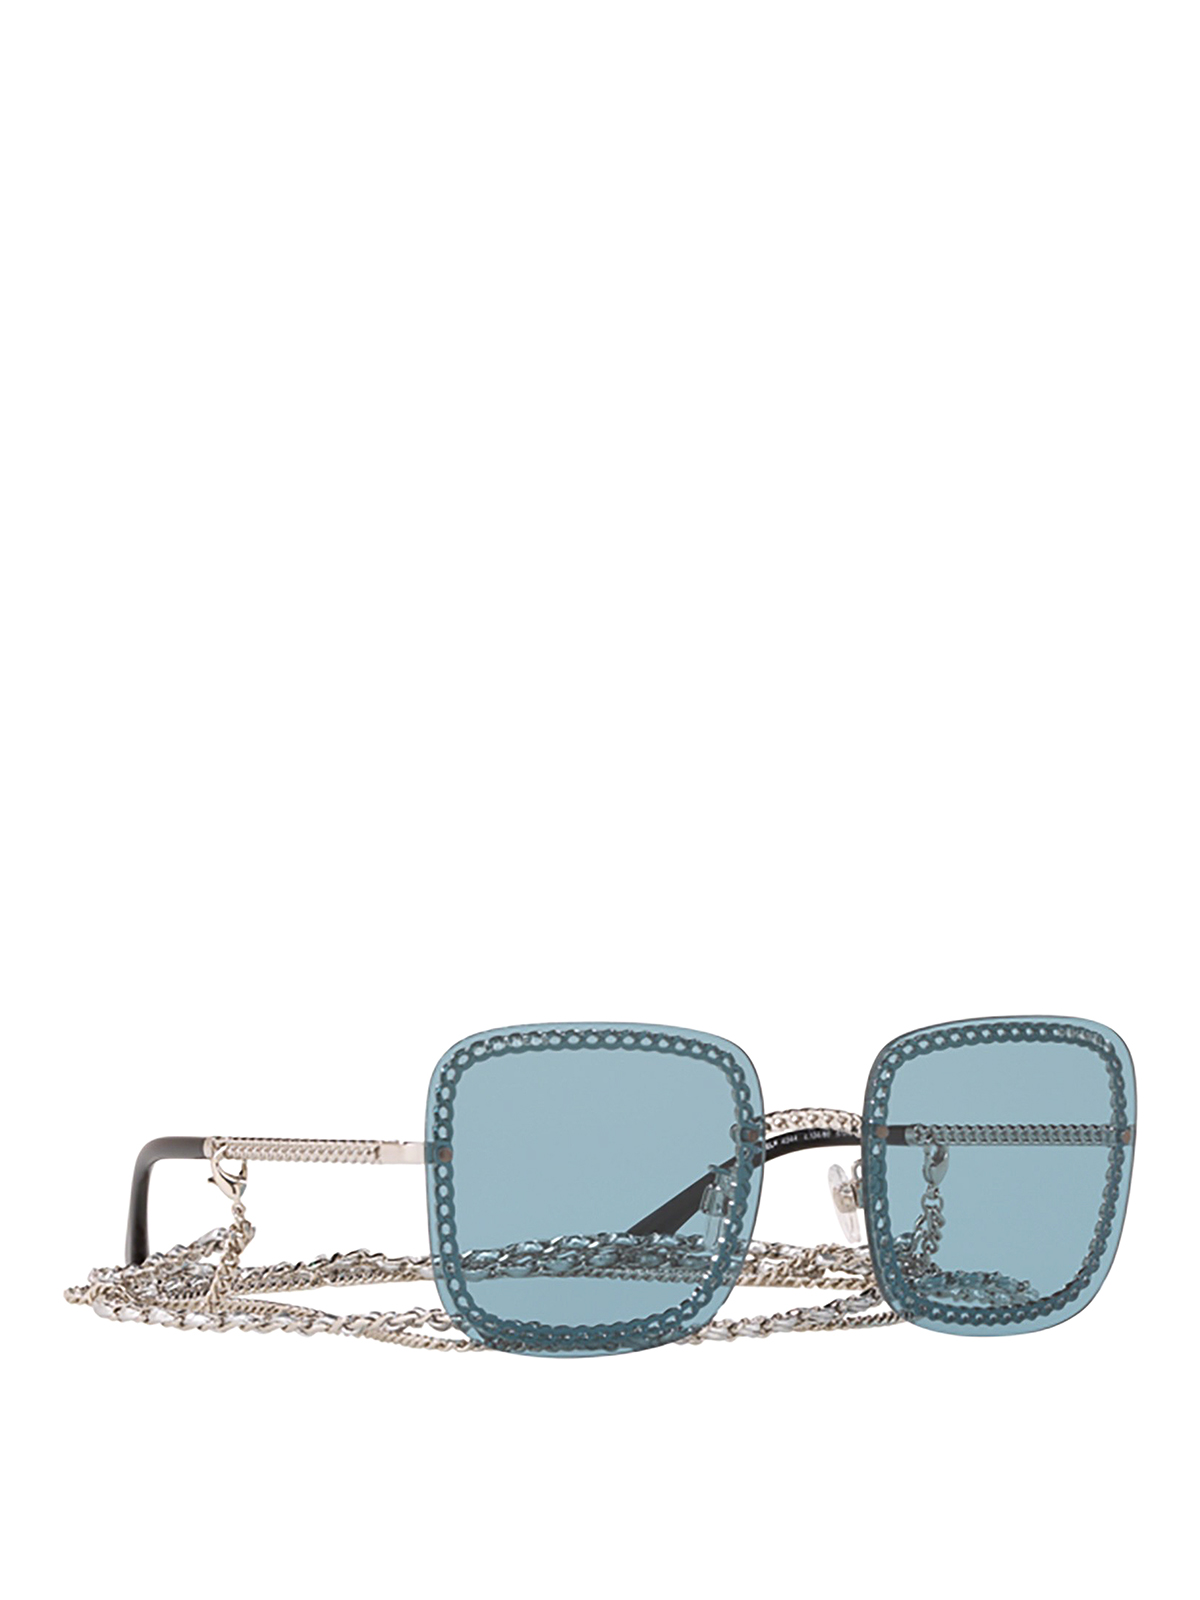 Sunglasses Chanel - Chain embellished blue squared sunglasses